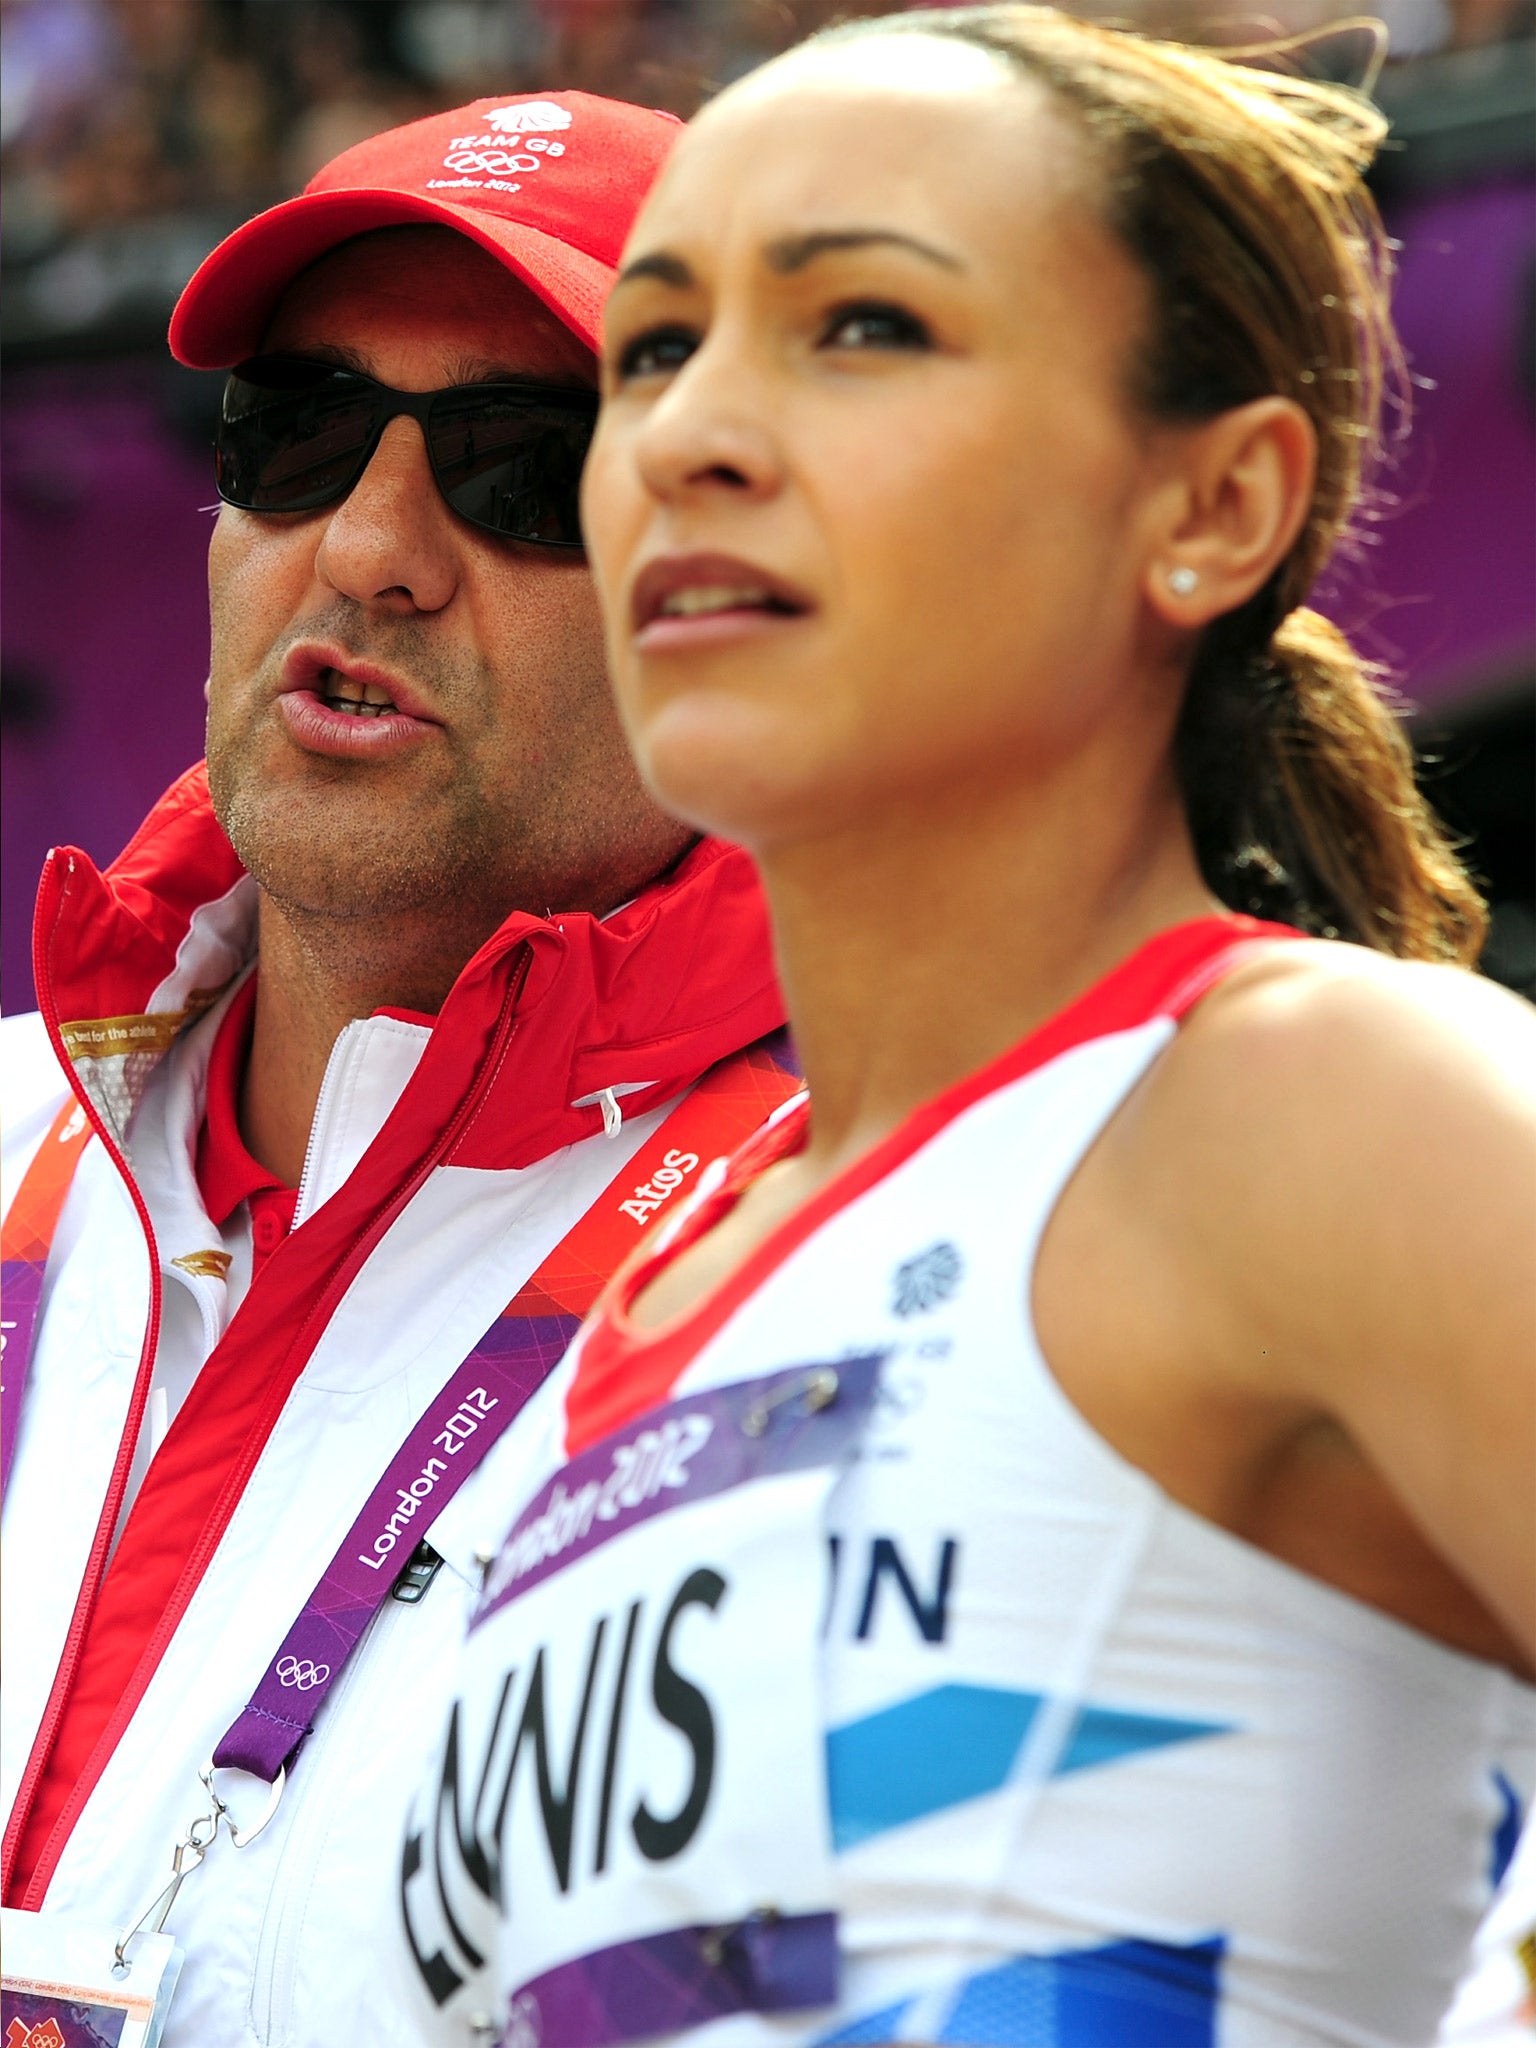 Jessica Ennis and Toni Minichiello during the London Games, where she handled the enormous pressure to win heptathlon gold by over 300 points